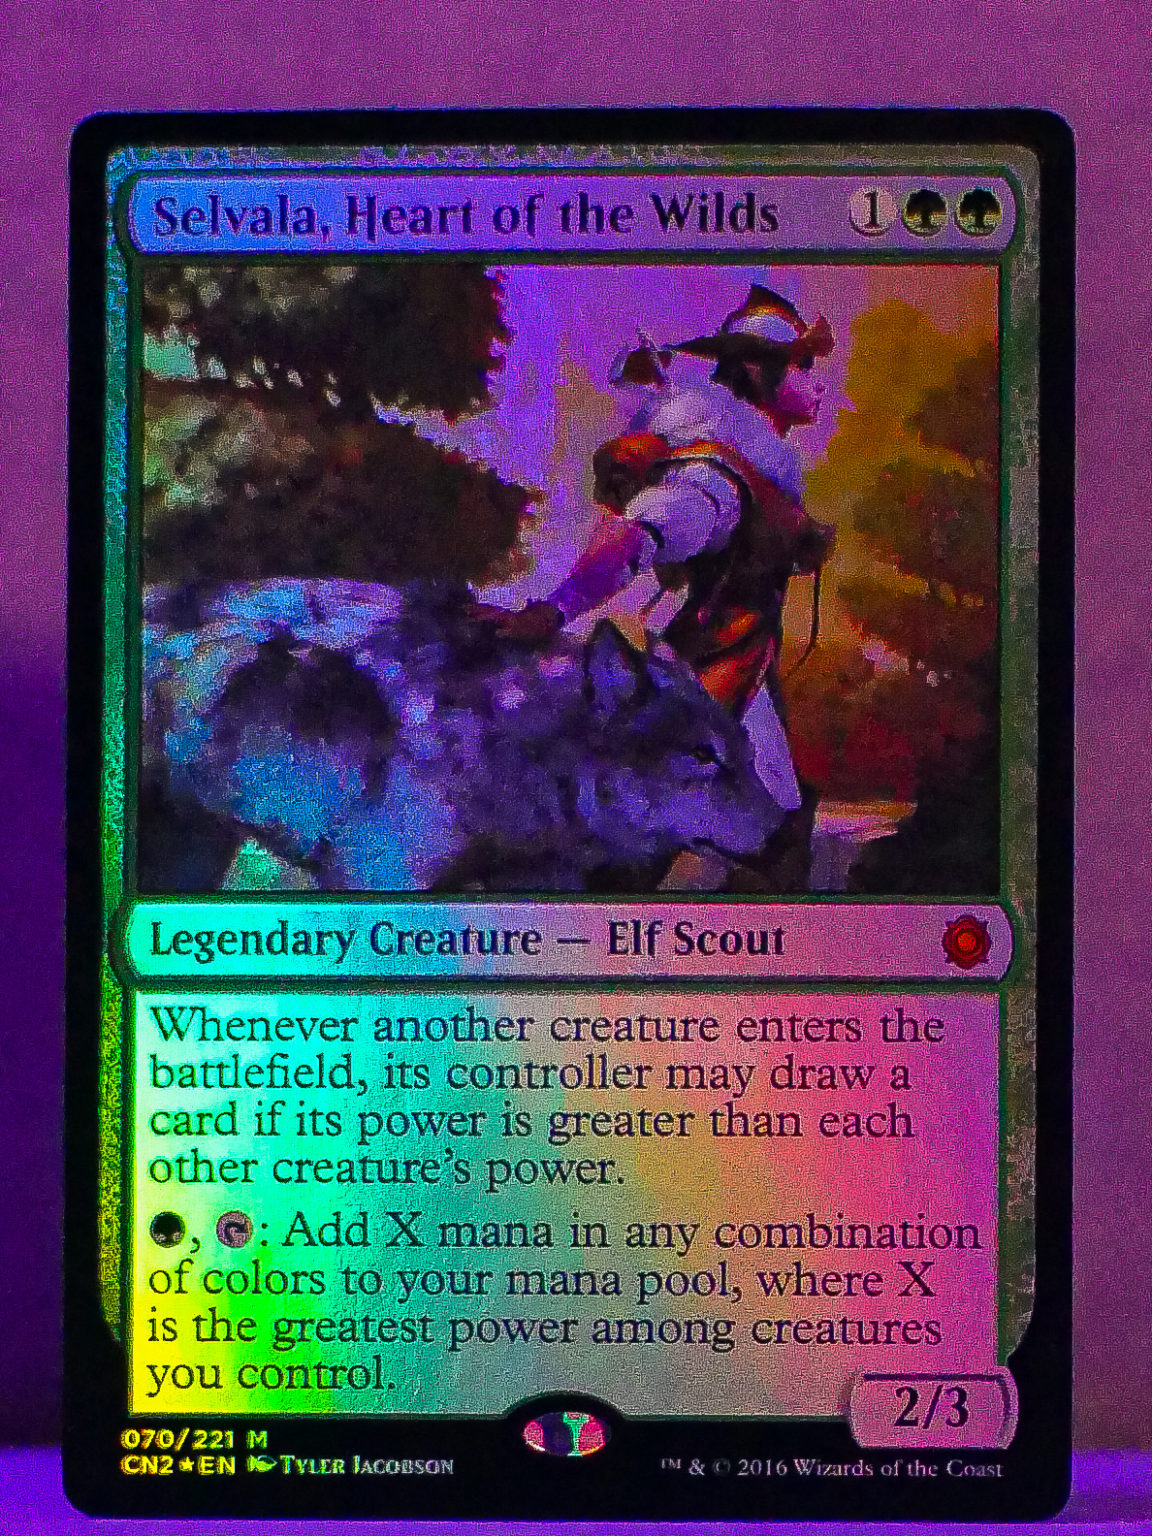 does selvala heart of the wilds work for you opponents